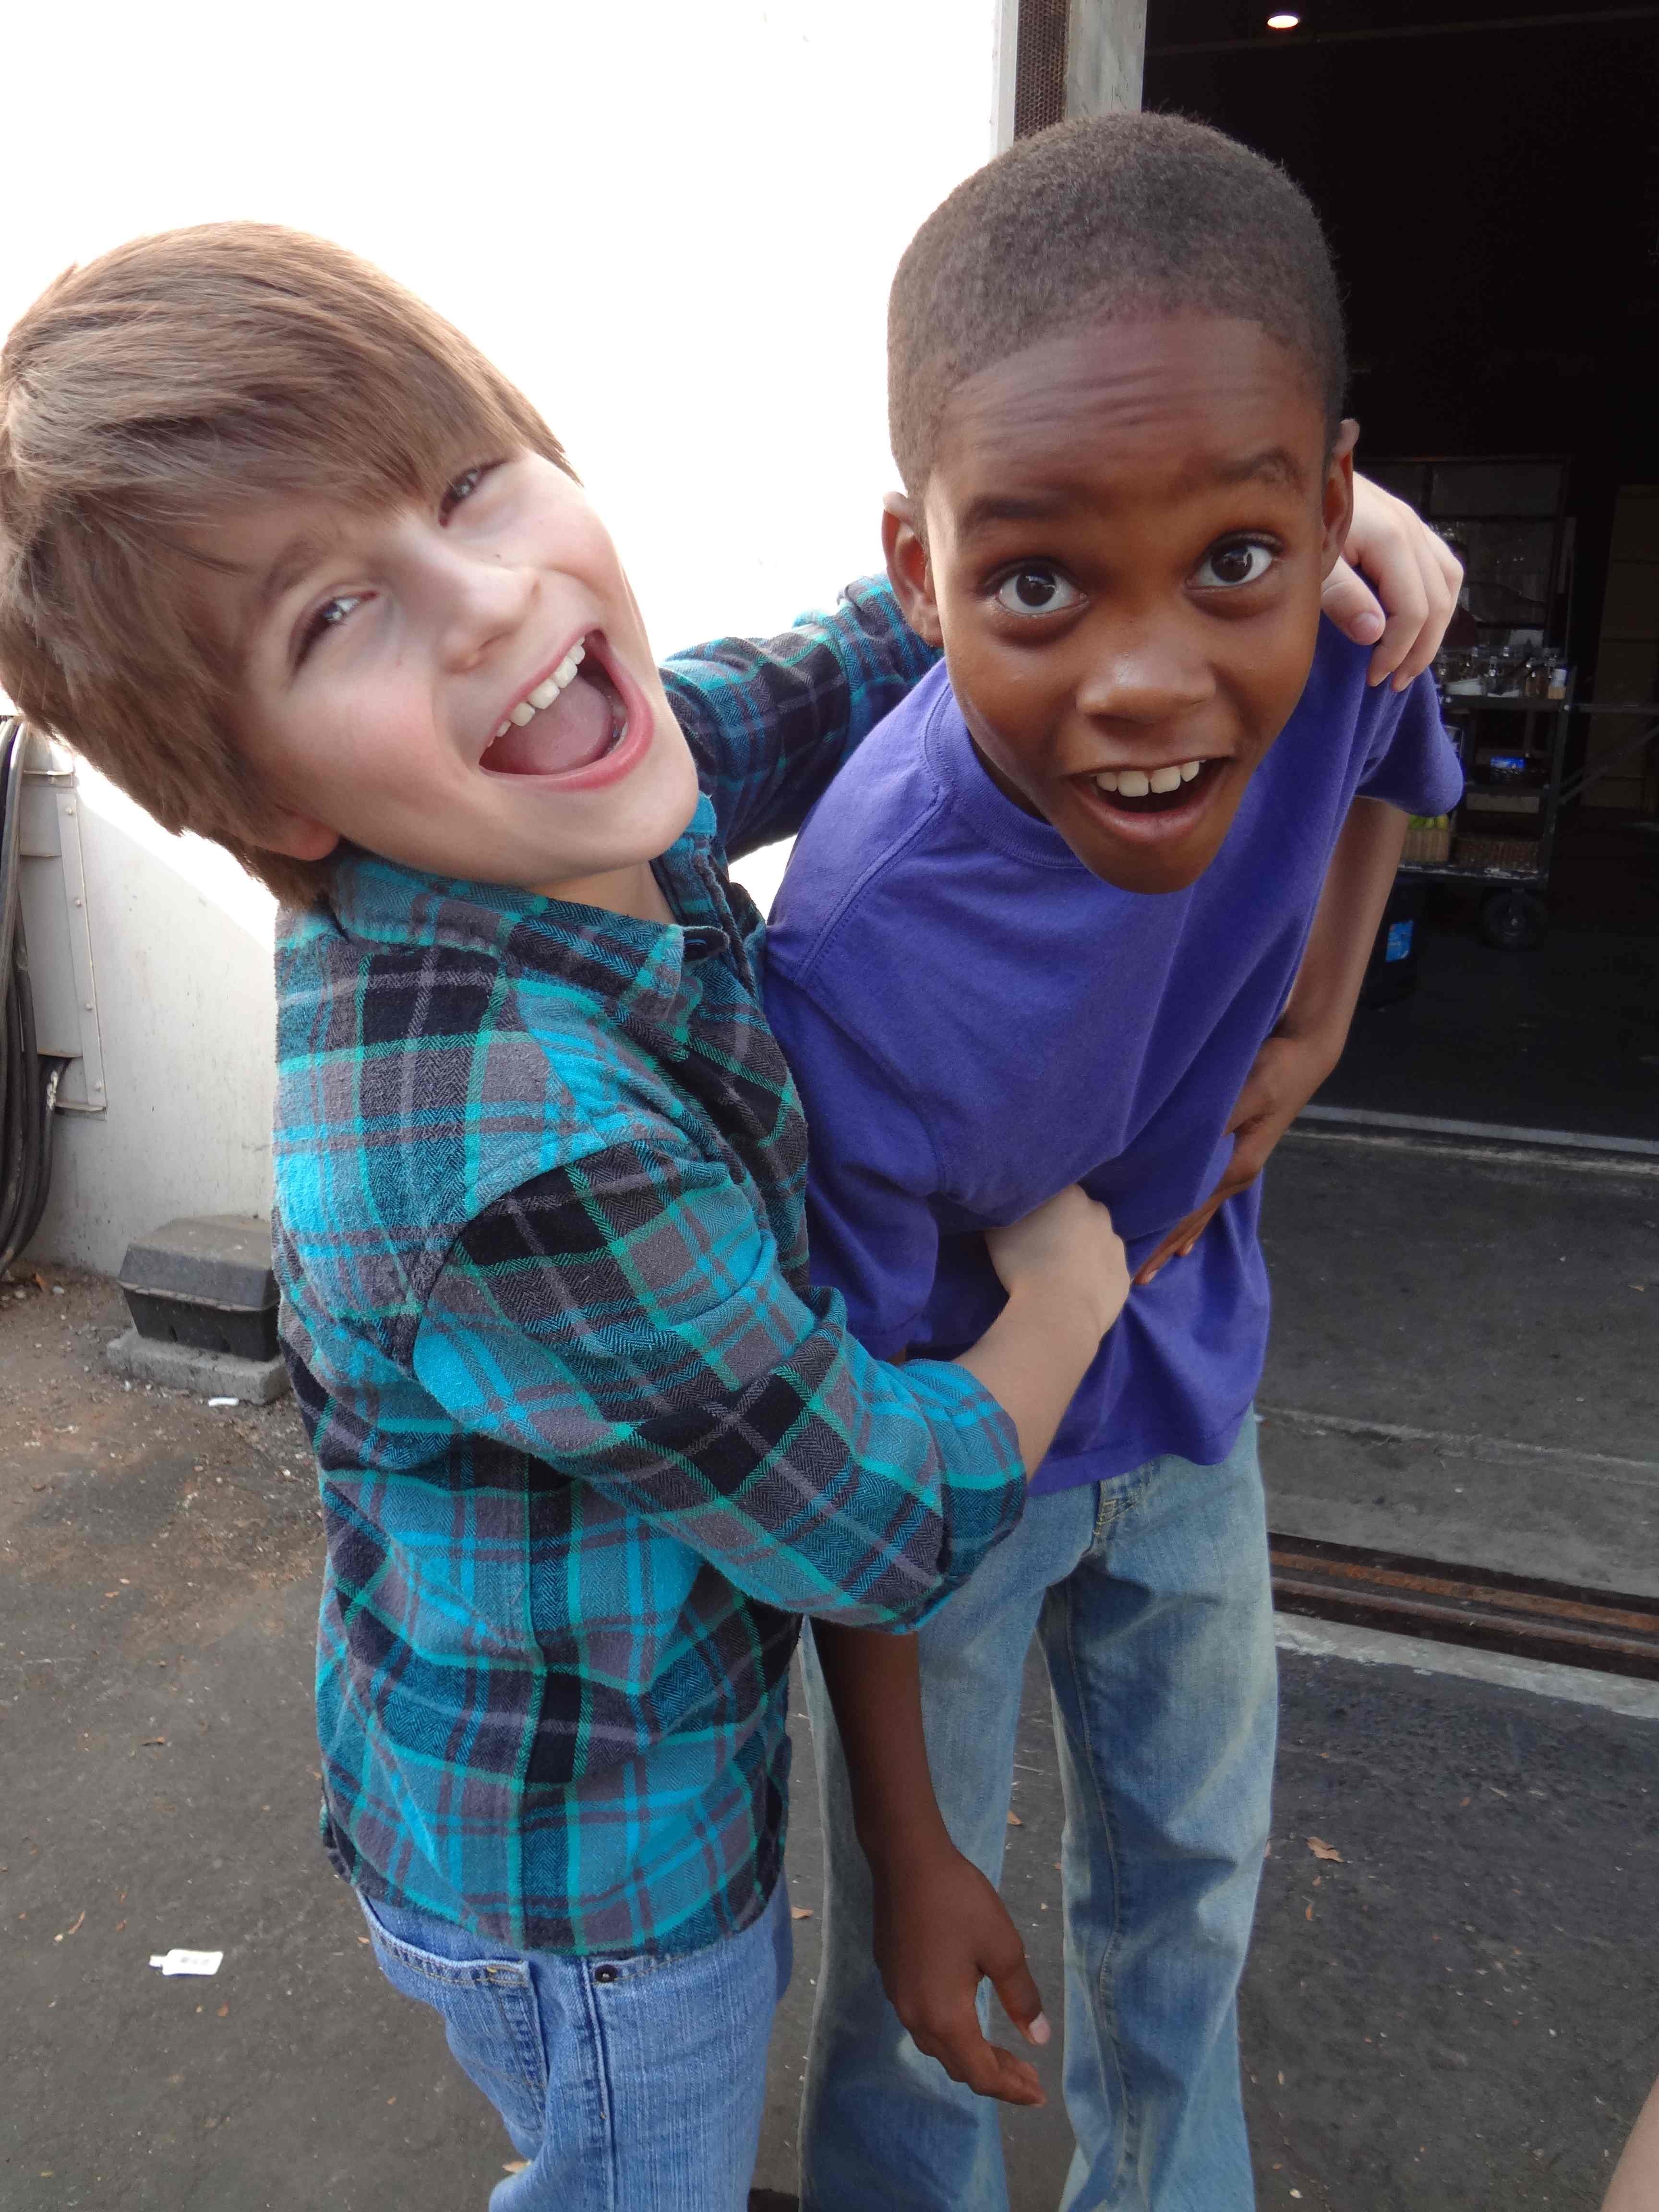 Young Winston and Young Nick on set of New Girl